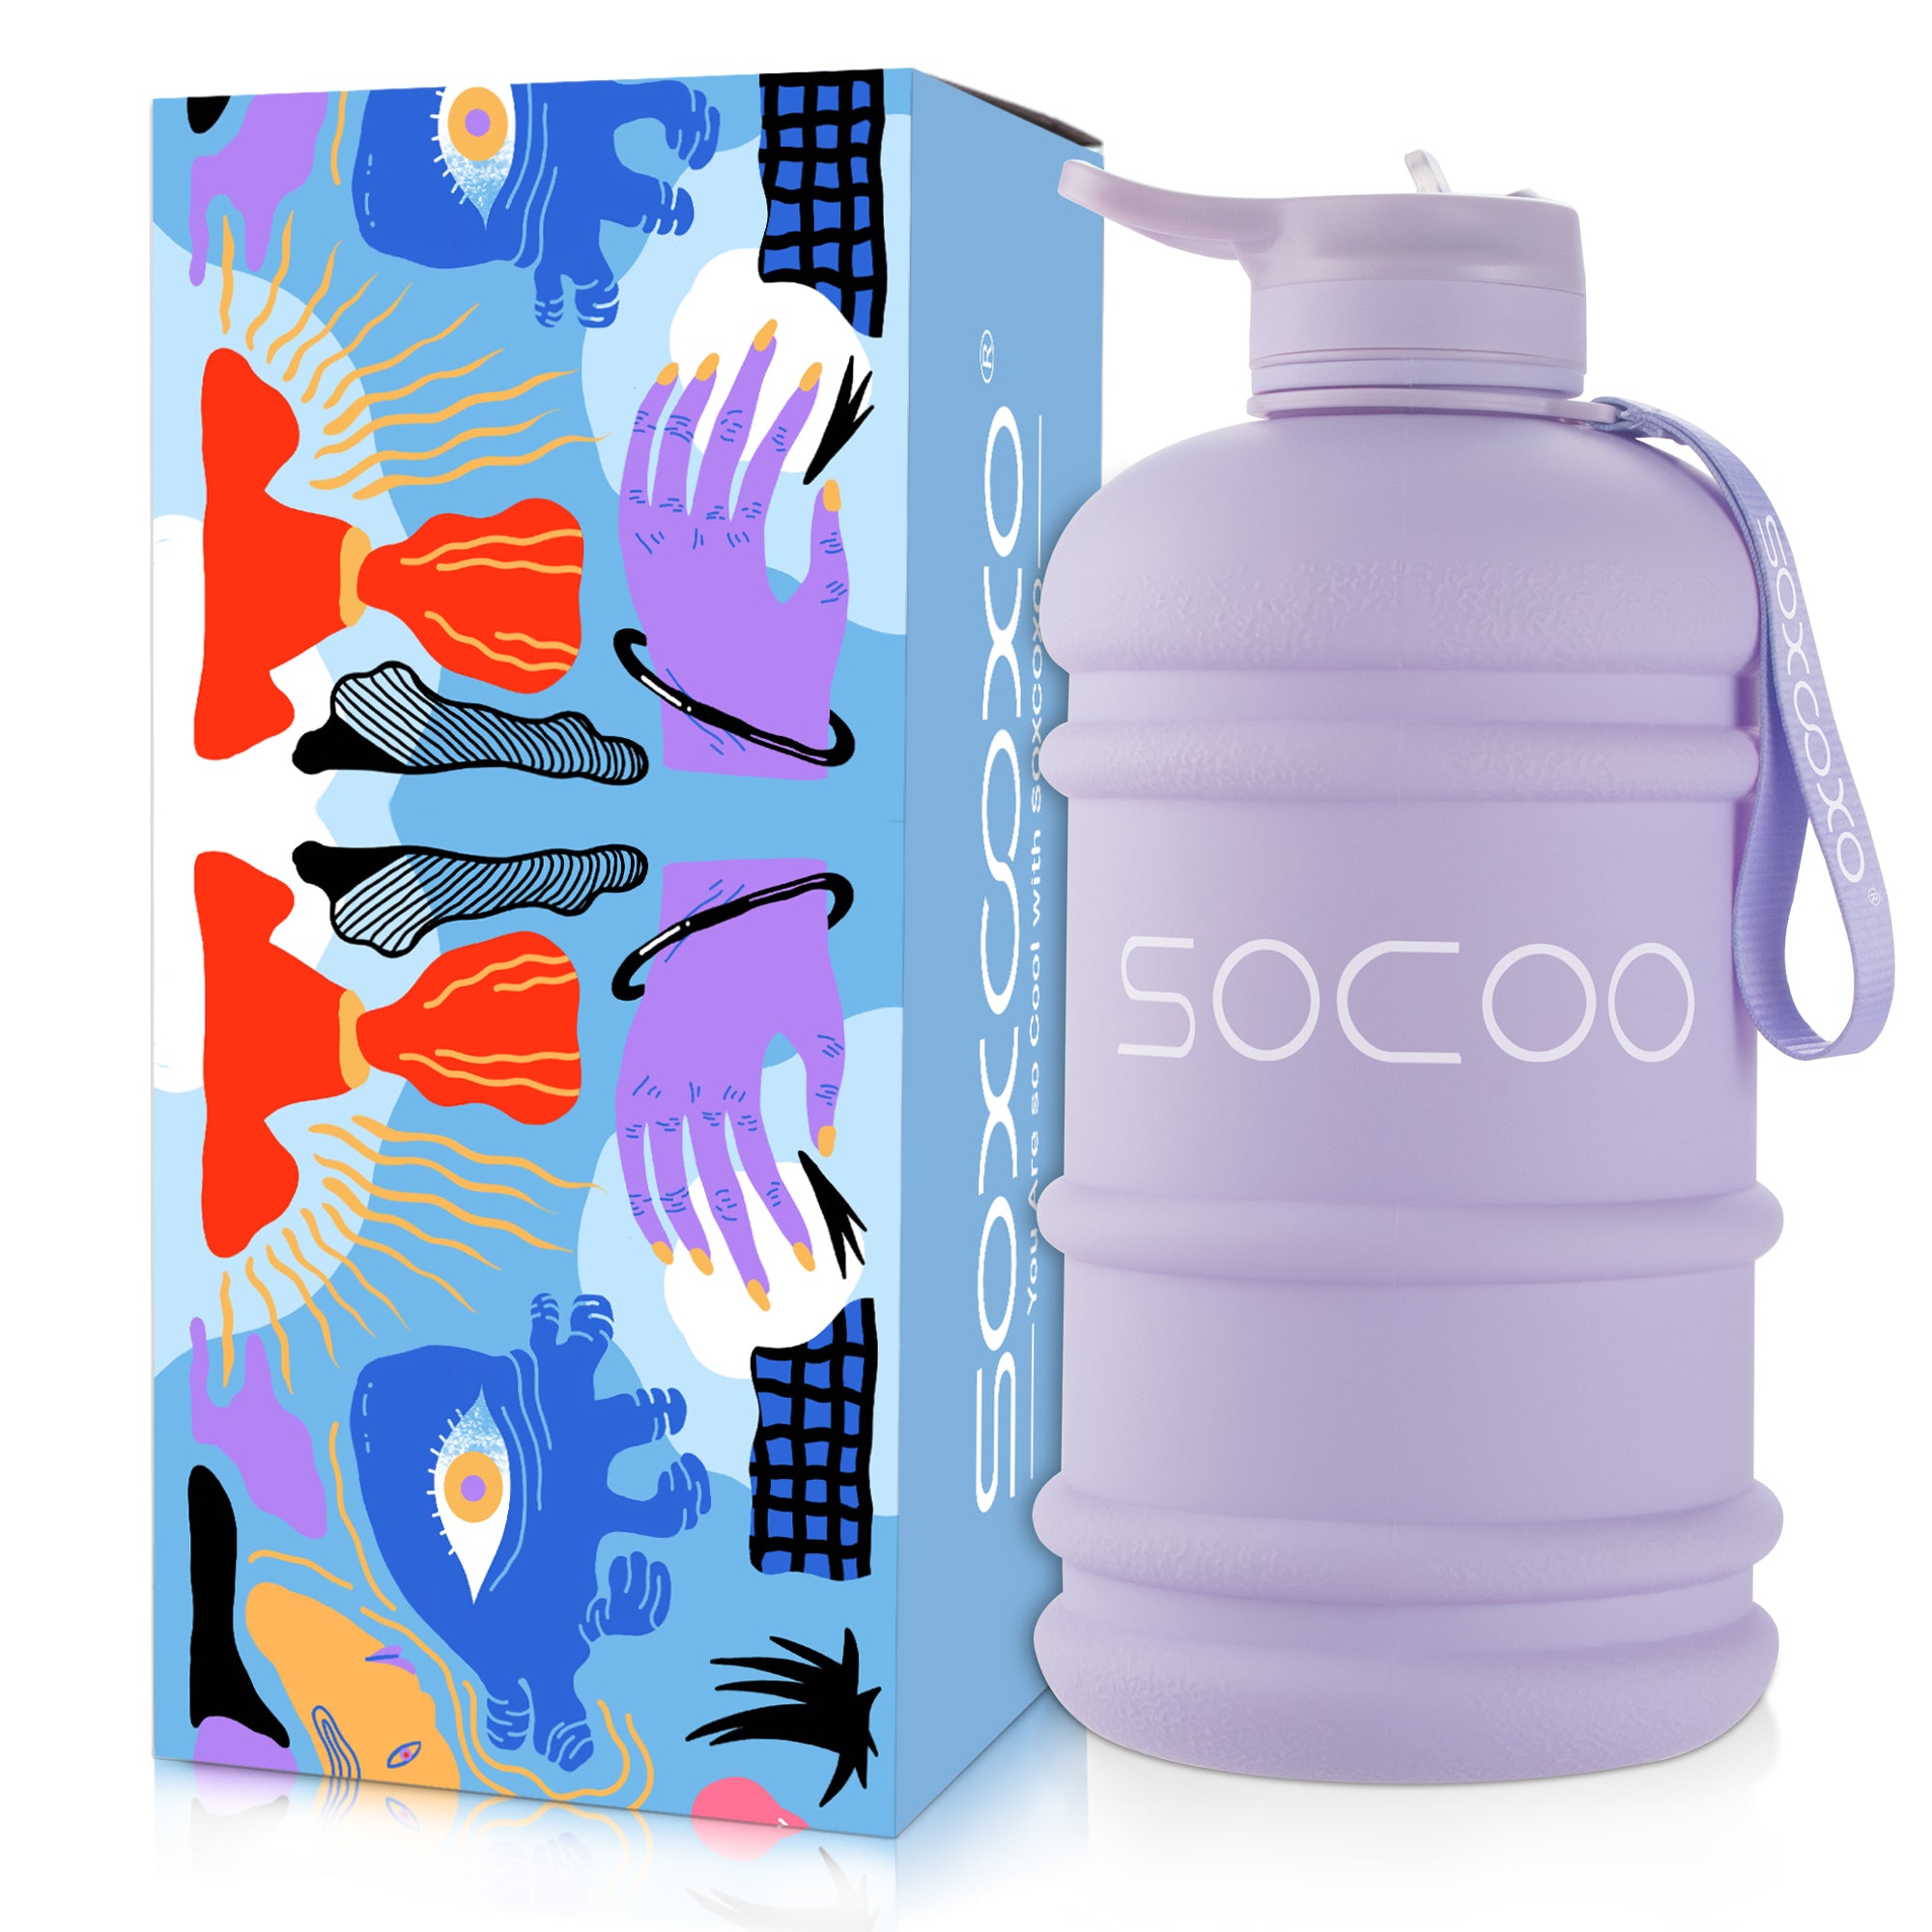 SOXCOXO 2.2L/74oz Half Gallon Water Bottle BPA Free Large Water Bottle with Handle Big Sports Bottle Jug for Yoga/Hiking/Gym/Camping Outdoor Sports Light Purple